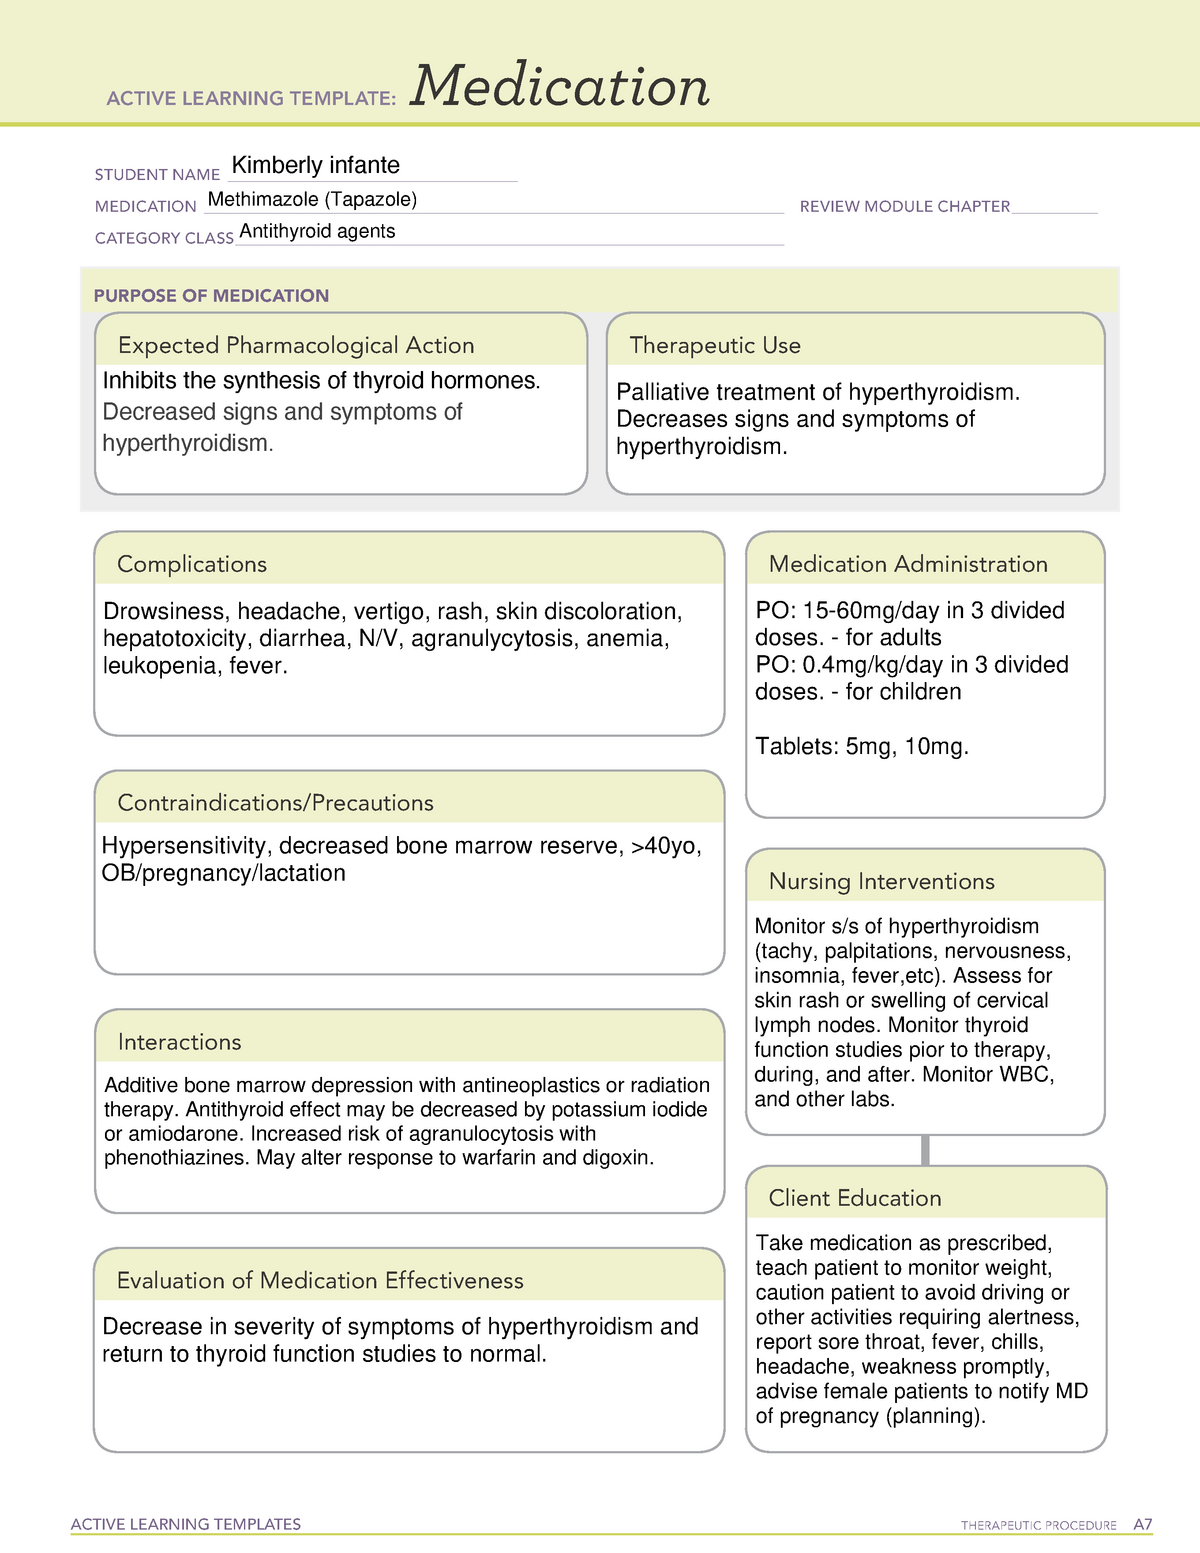 med-card-methimazole-medication-ati-template-active-learning-templates-therapeutic-procedure